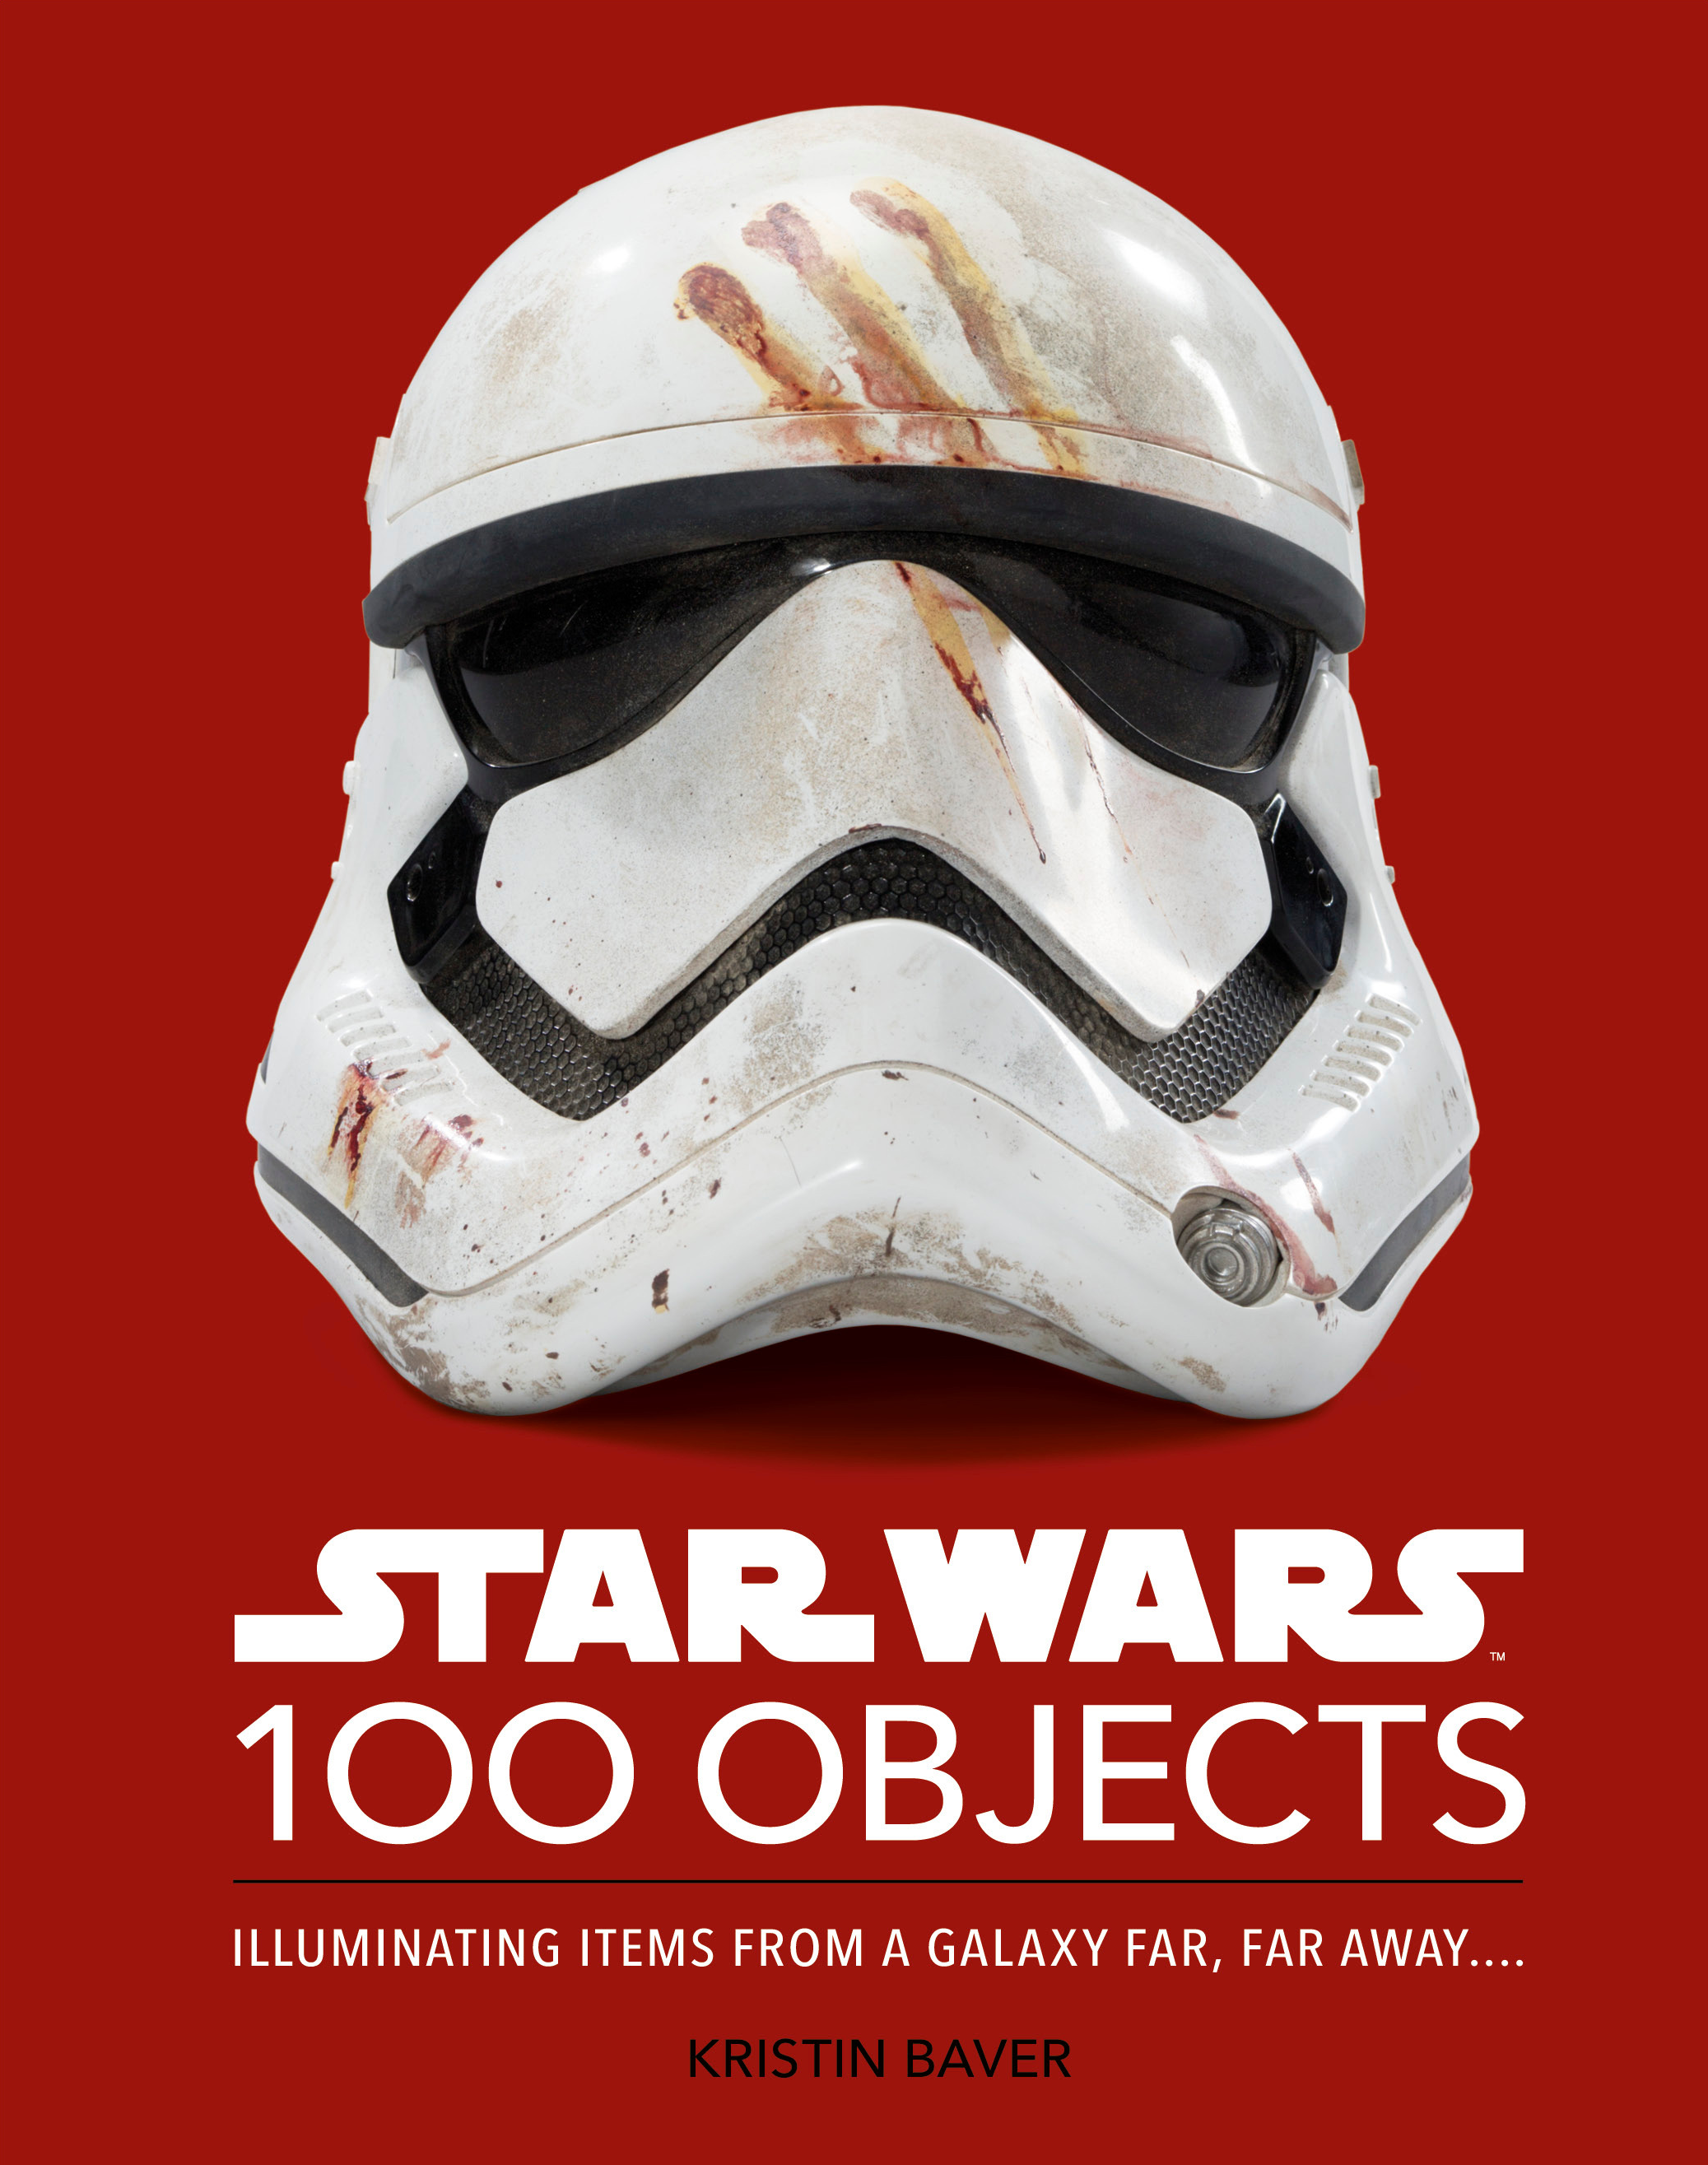 https://static.wikia.nocookie.net/starwars/images/0/06/SWin100Objects-cover.png/revision/latest?cb=20221124182116